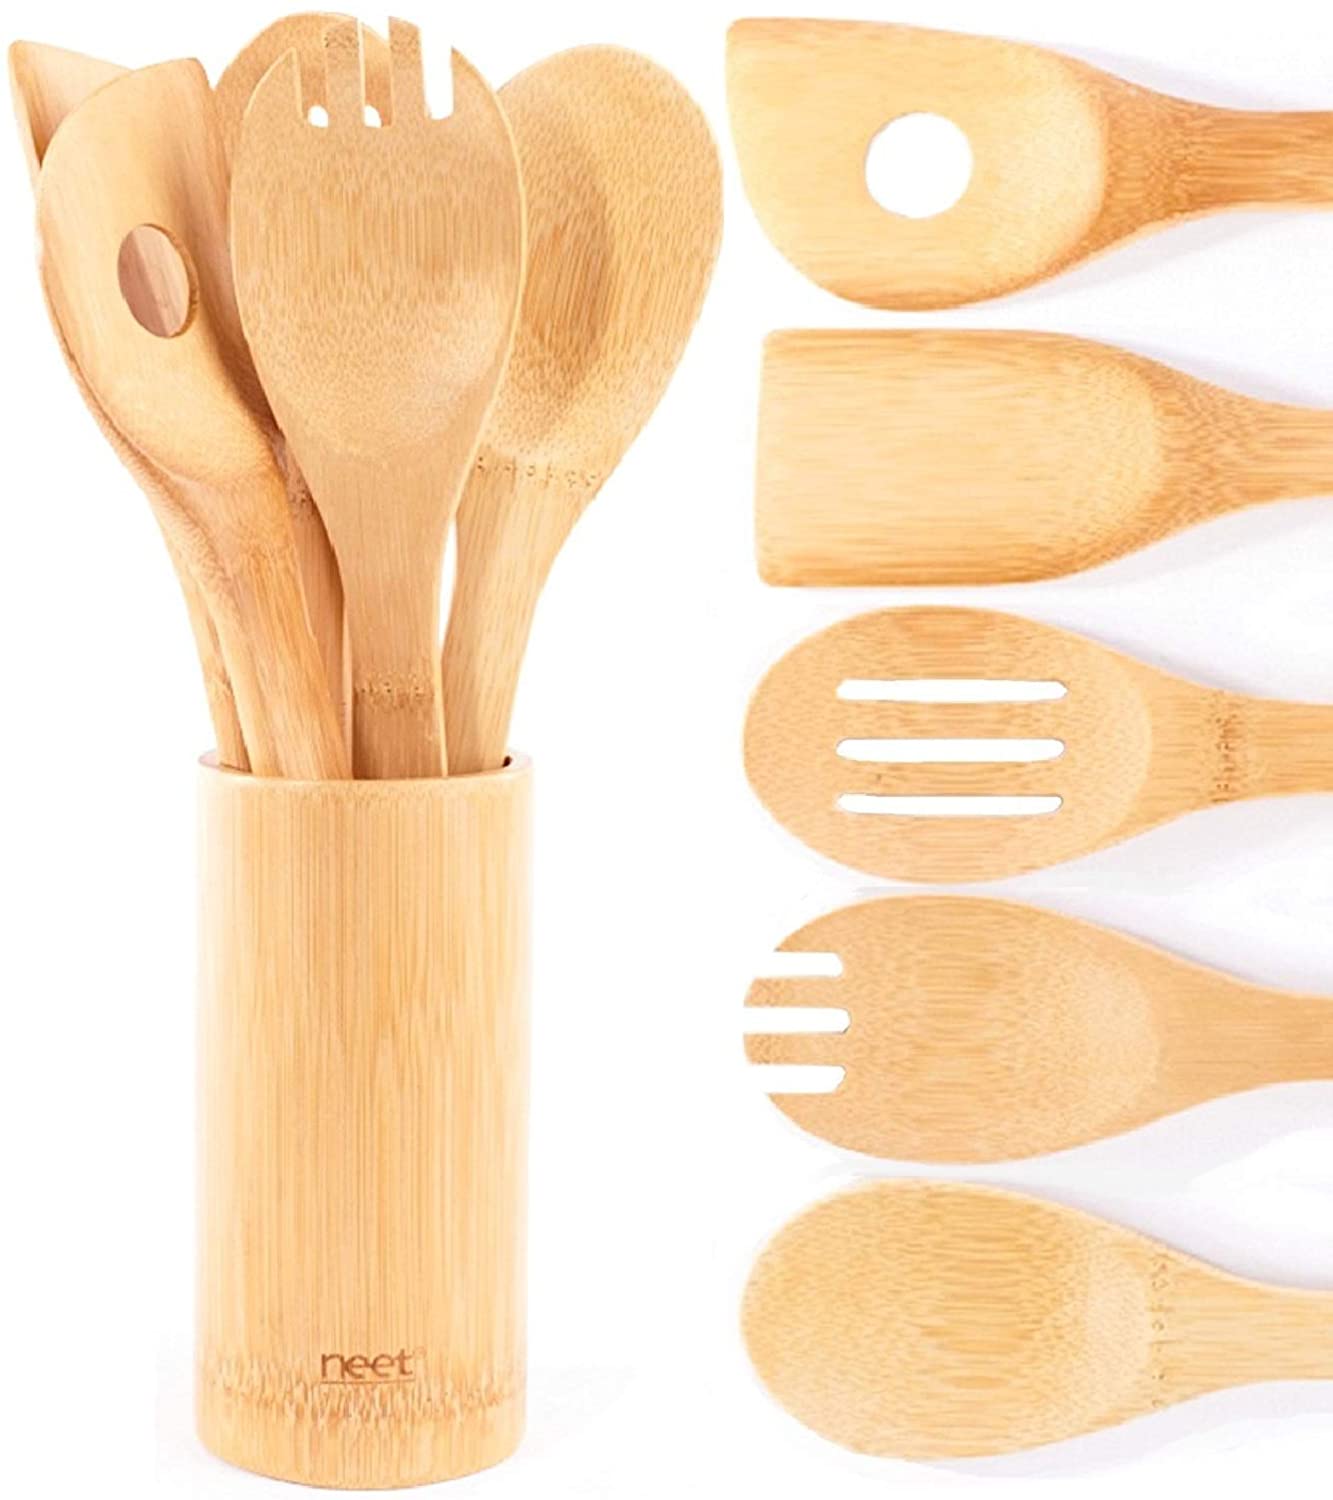 NEET Organic Bamboo Cooking & Serving Non-Stick Wooden Spoons, 6-Piece